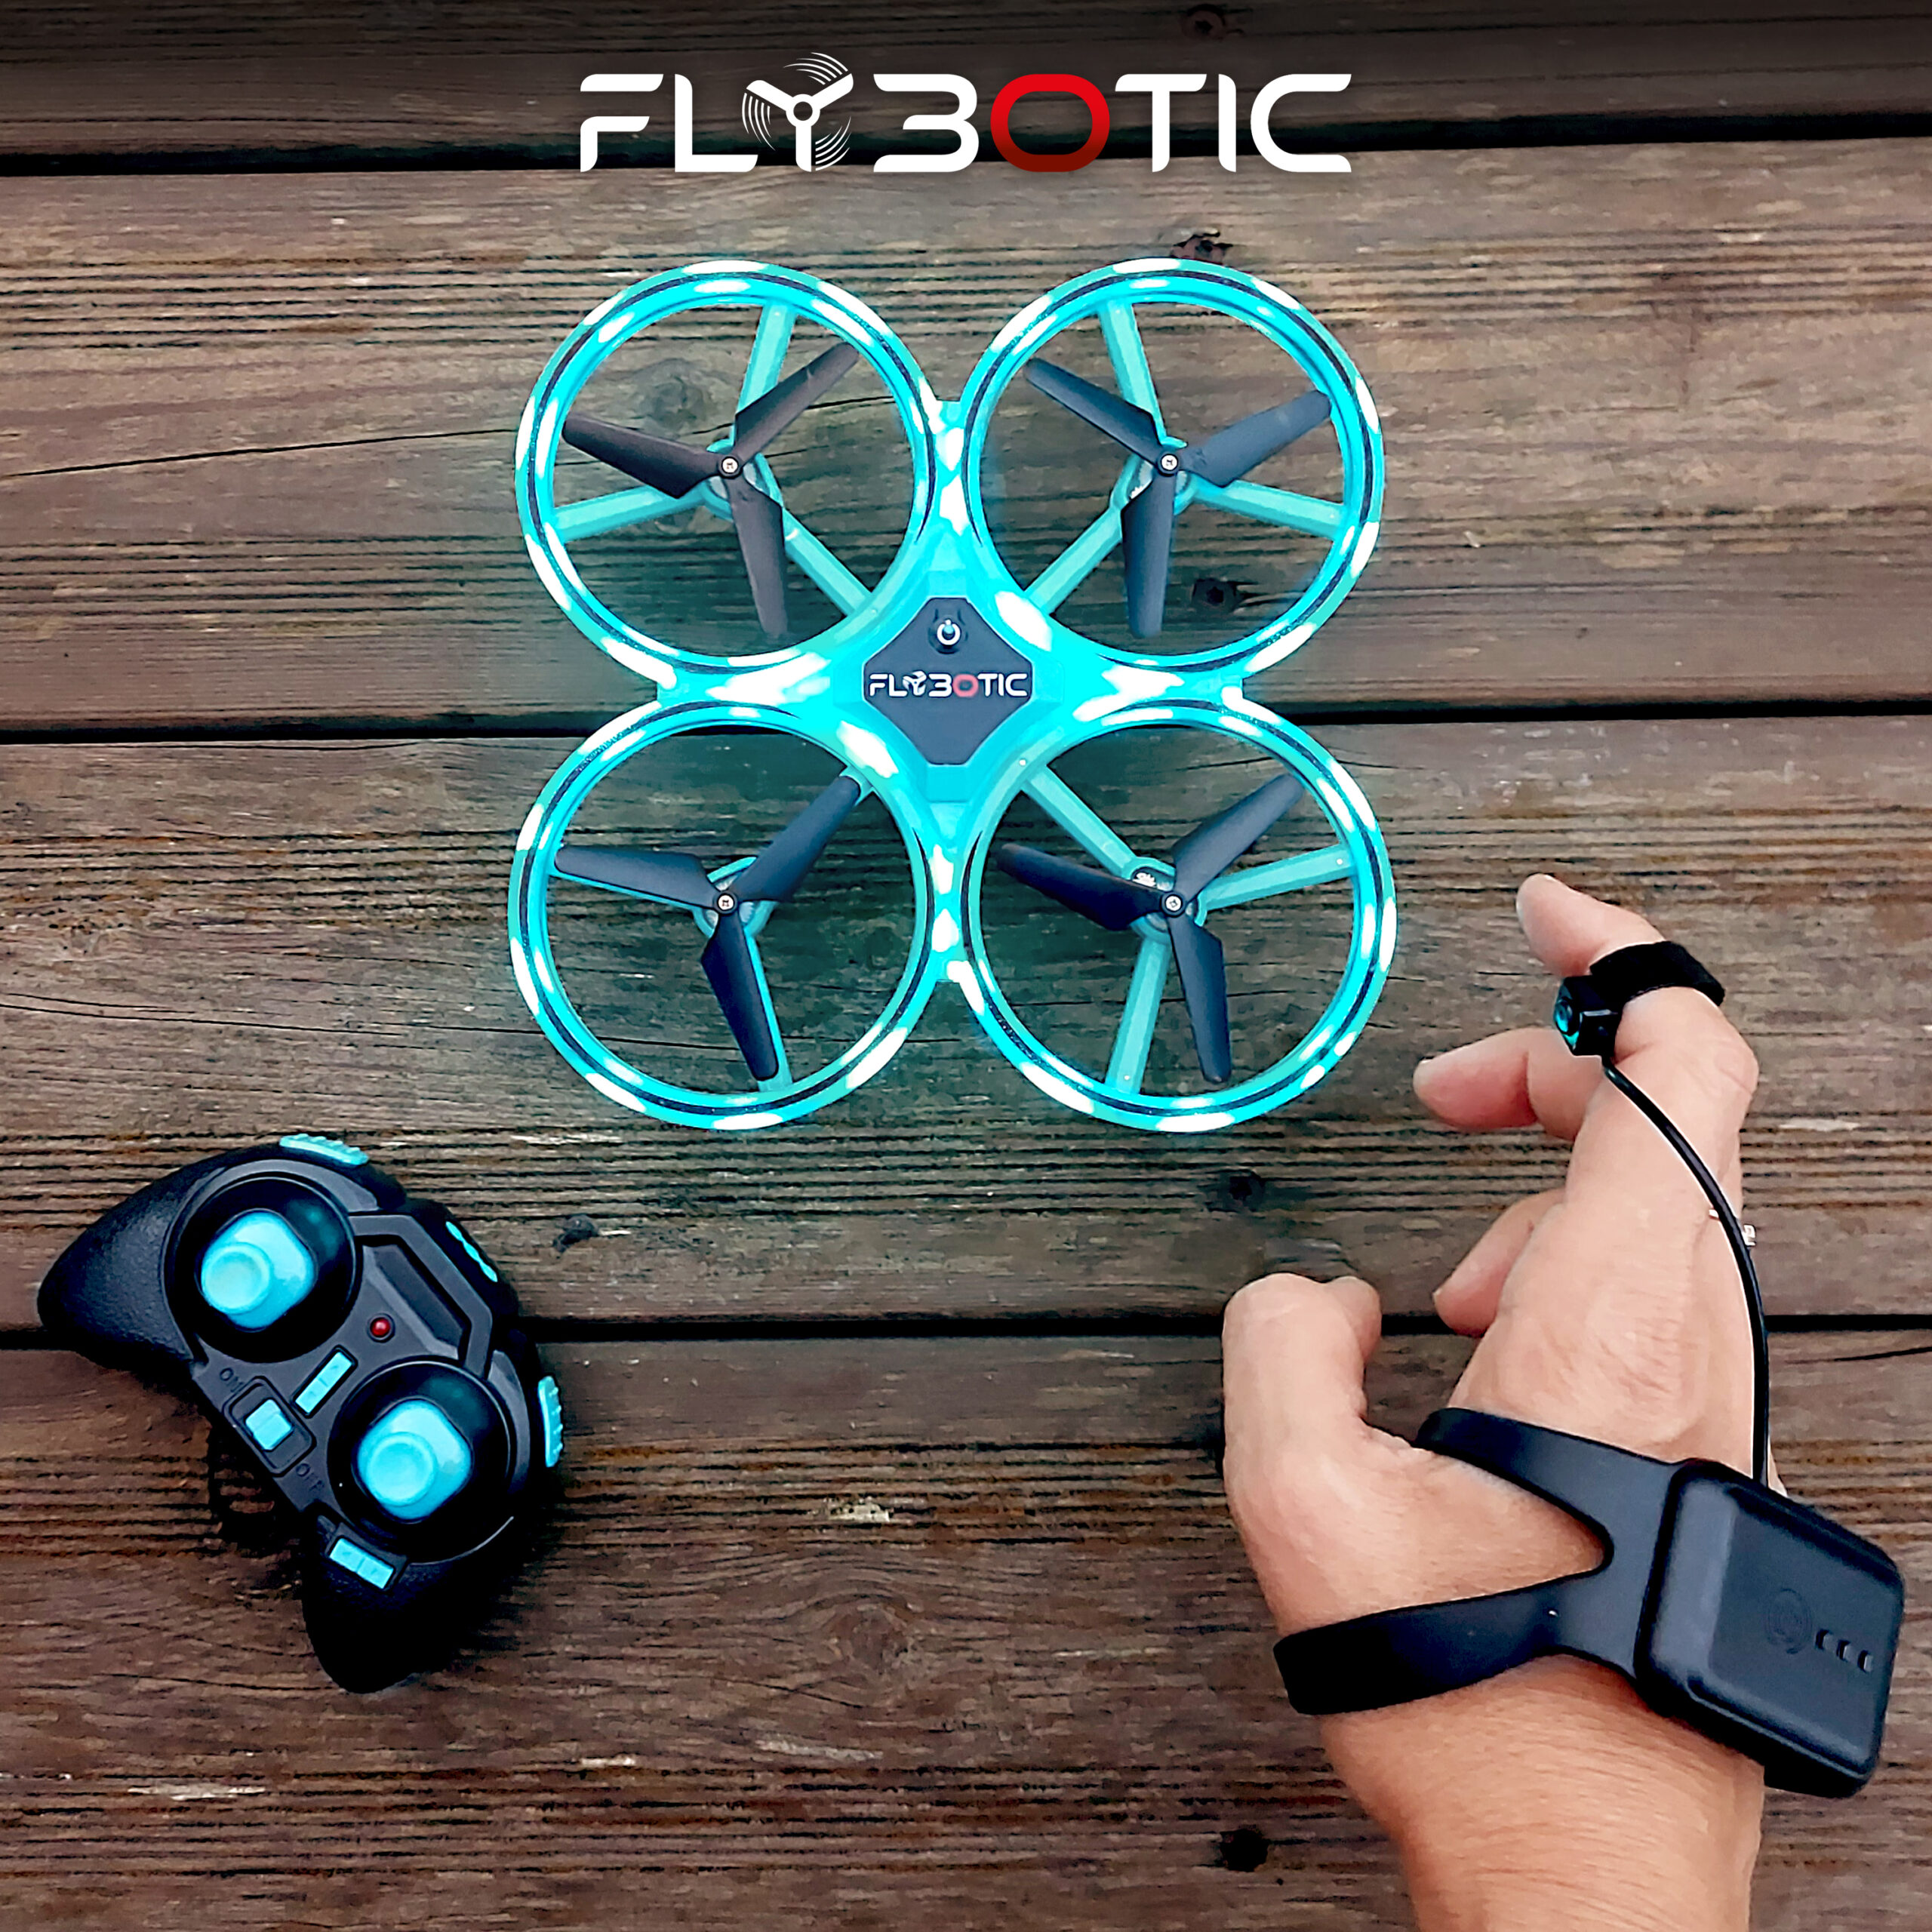 Flybotic Flashing Drone - 869035 